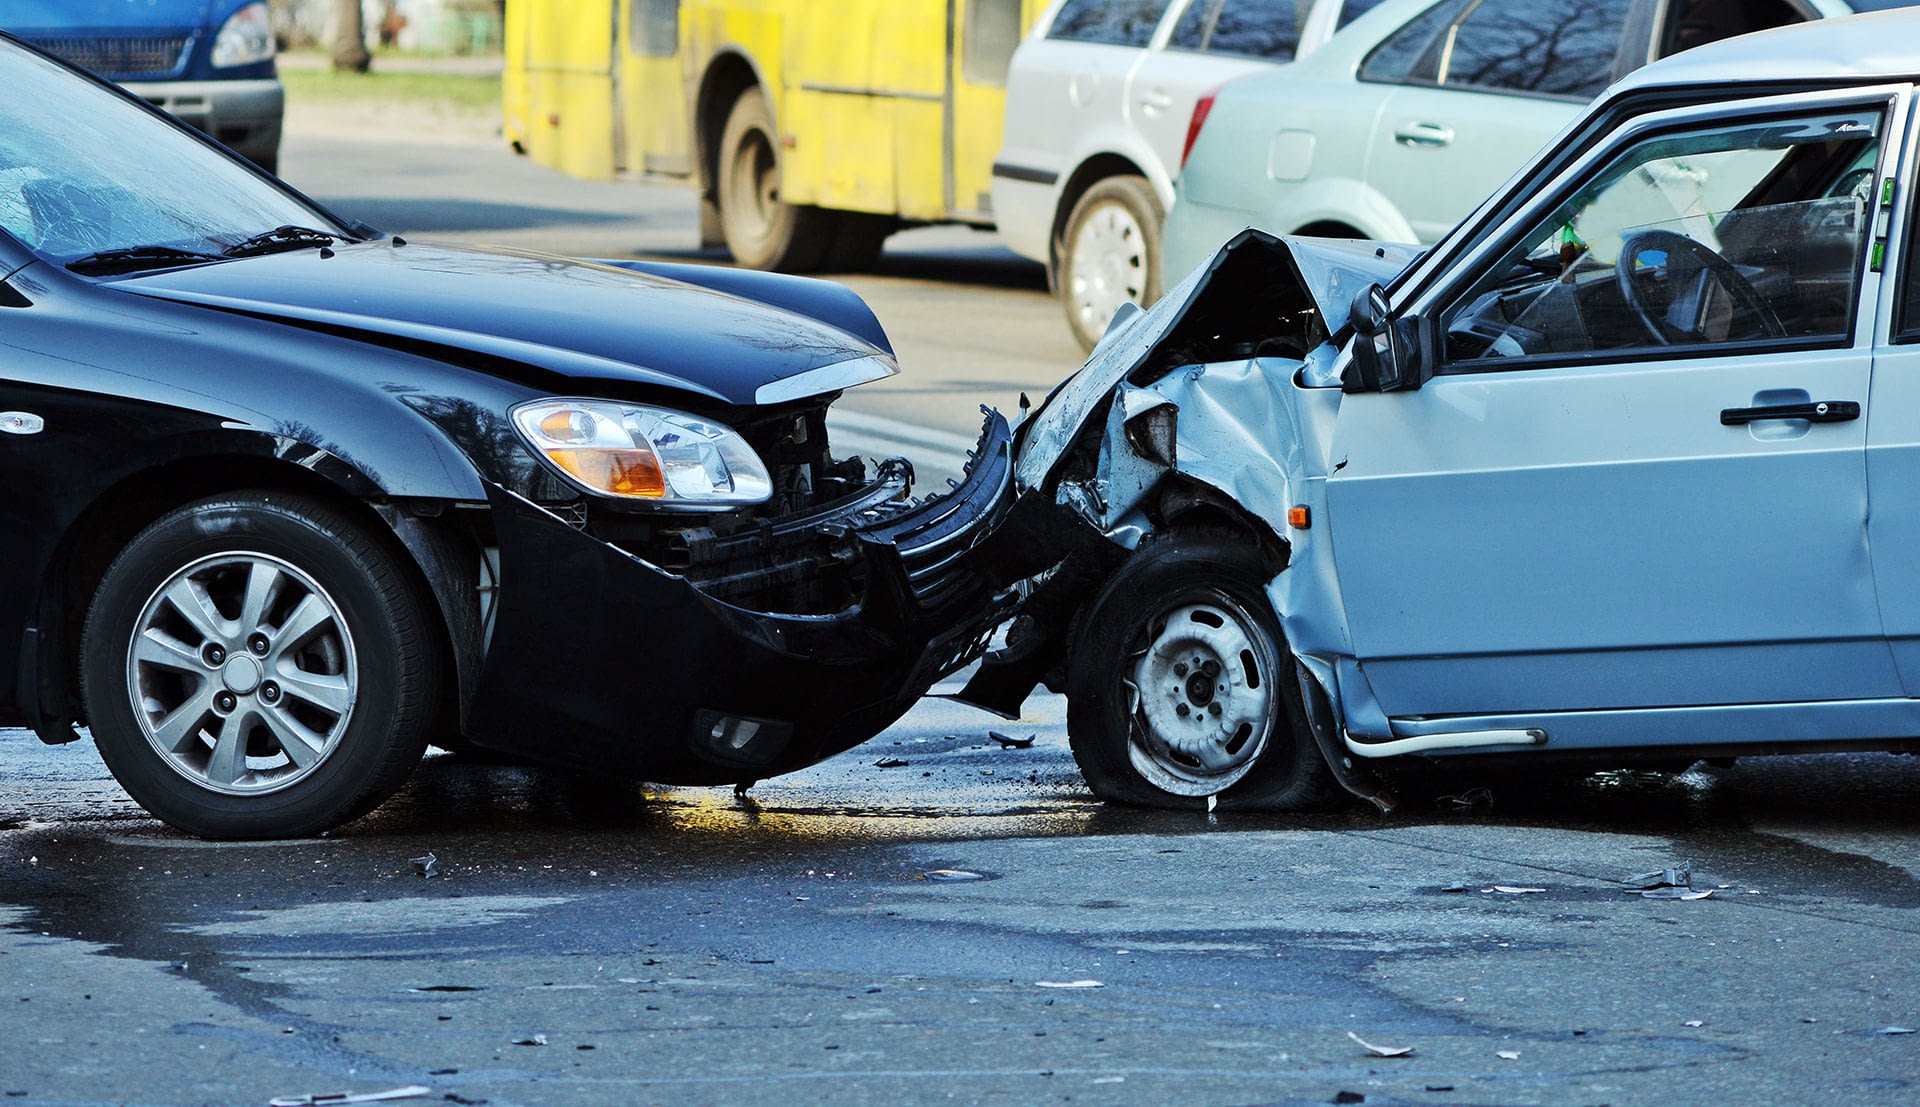 Top 7 Things To Do After A Car Accident